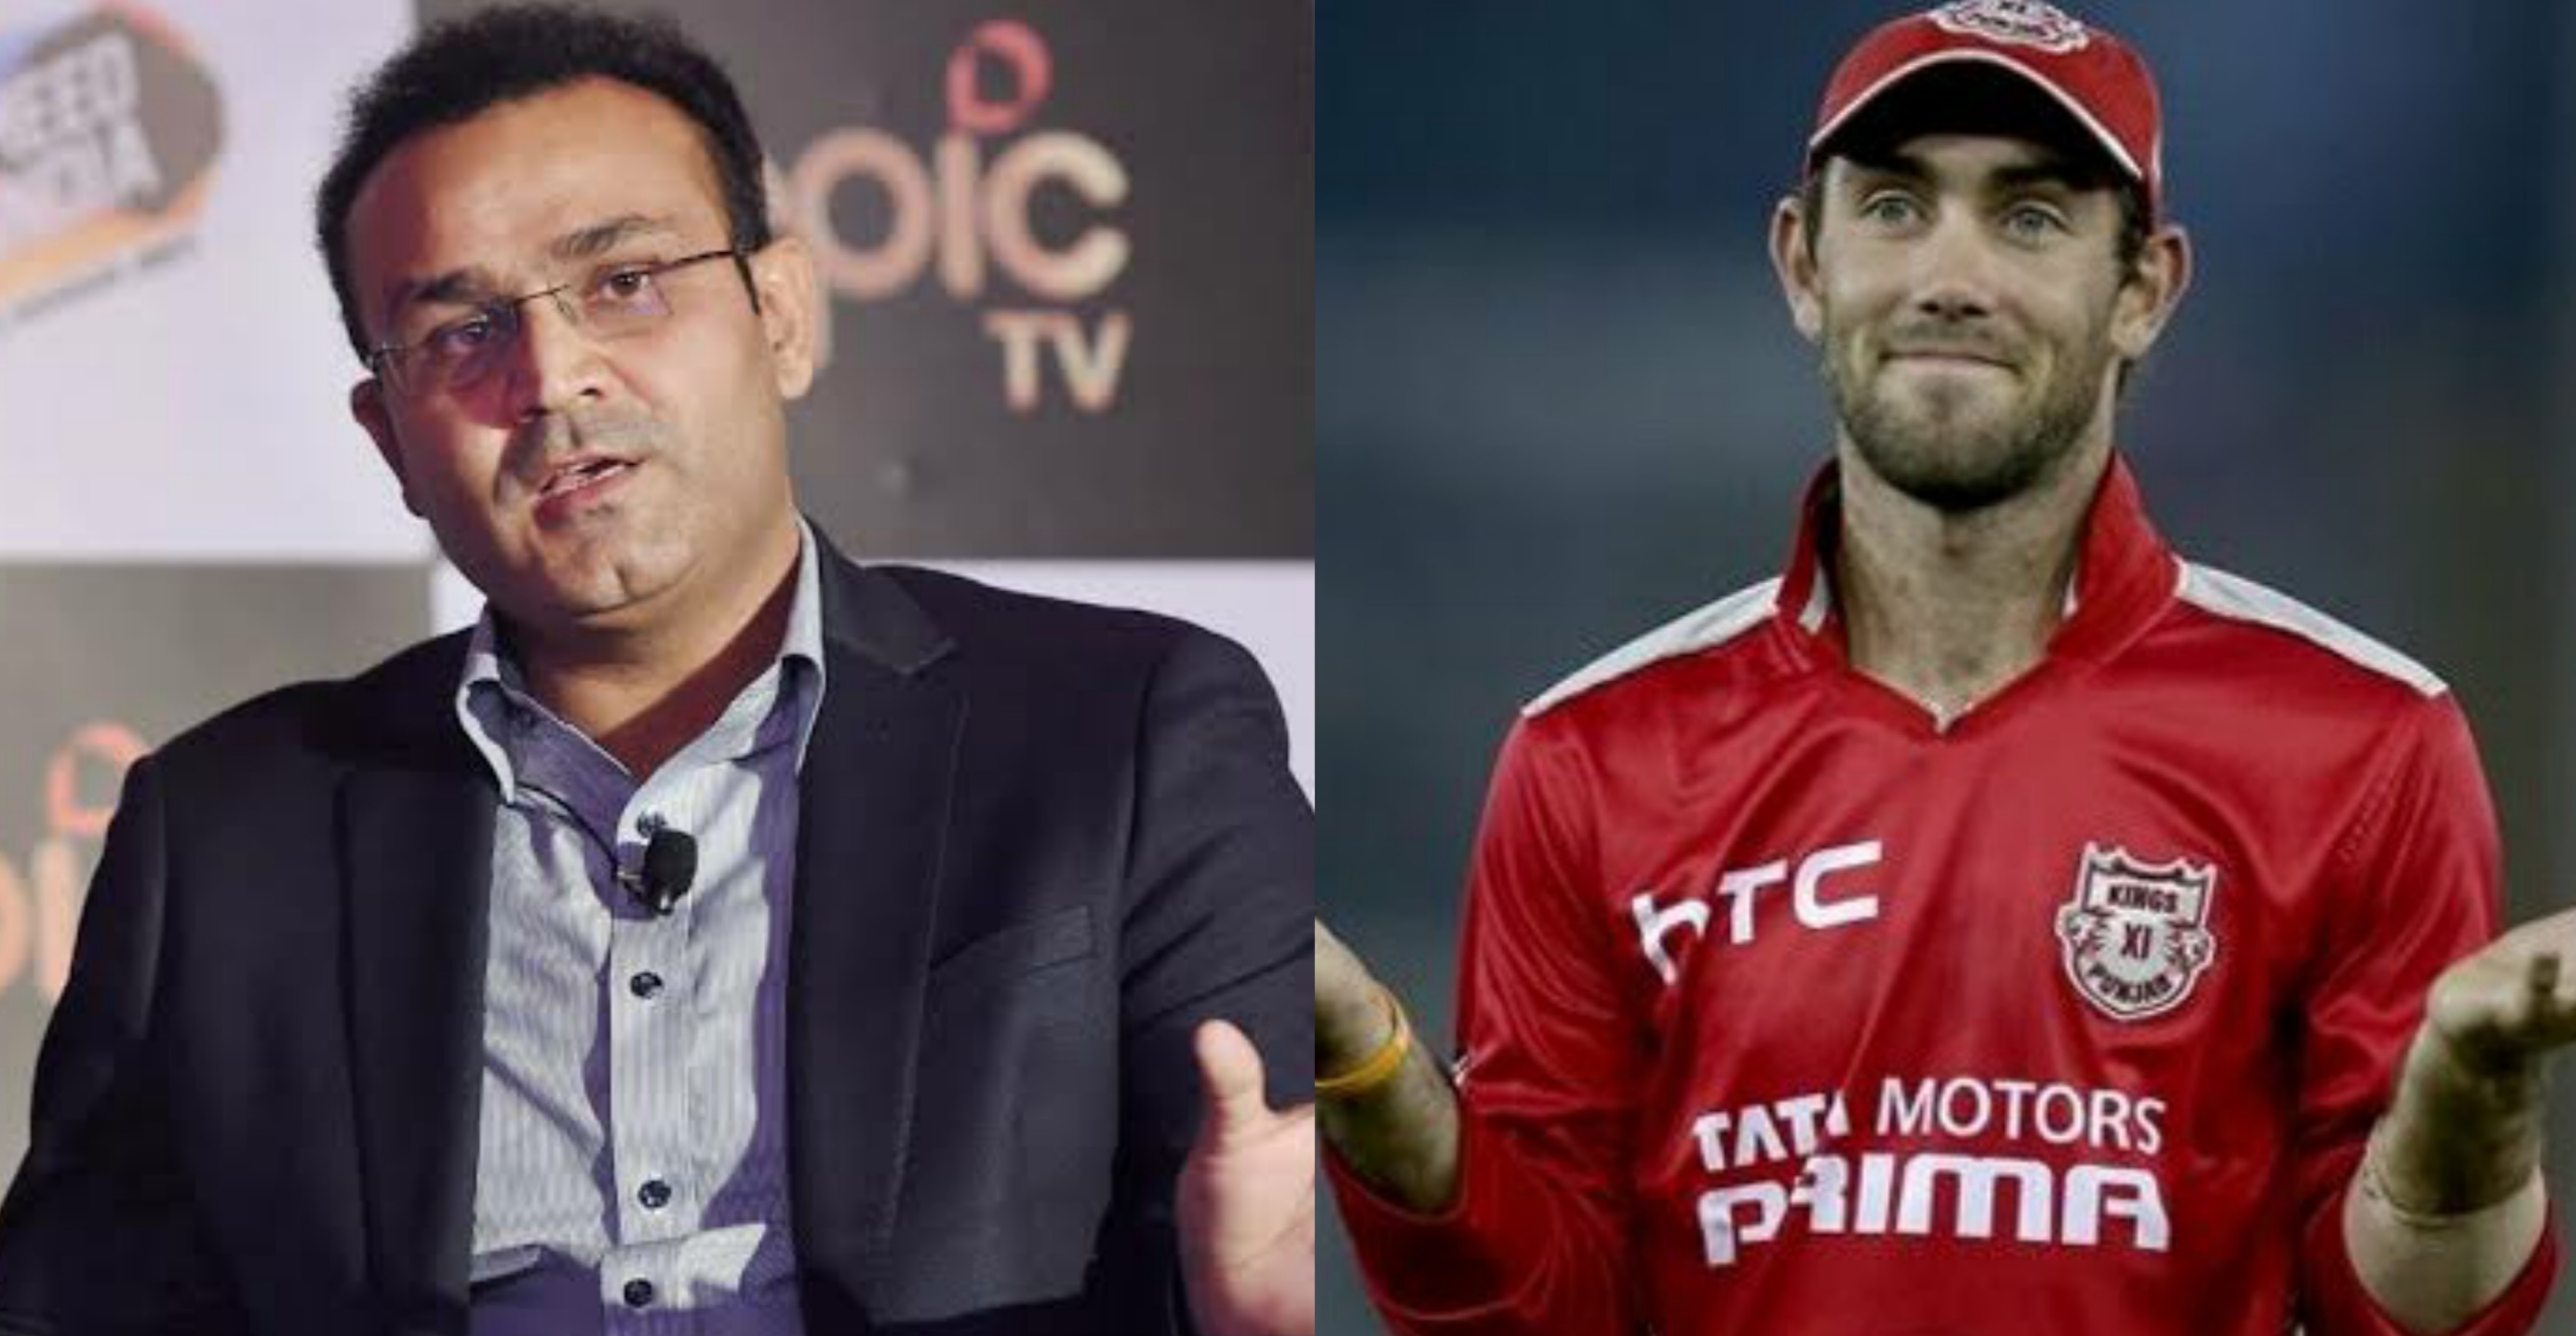 'He’s in the media for such statements': Maxwell responds to Sehwag's cheerleader comment